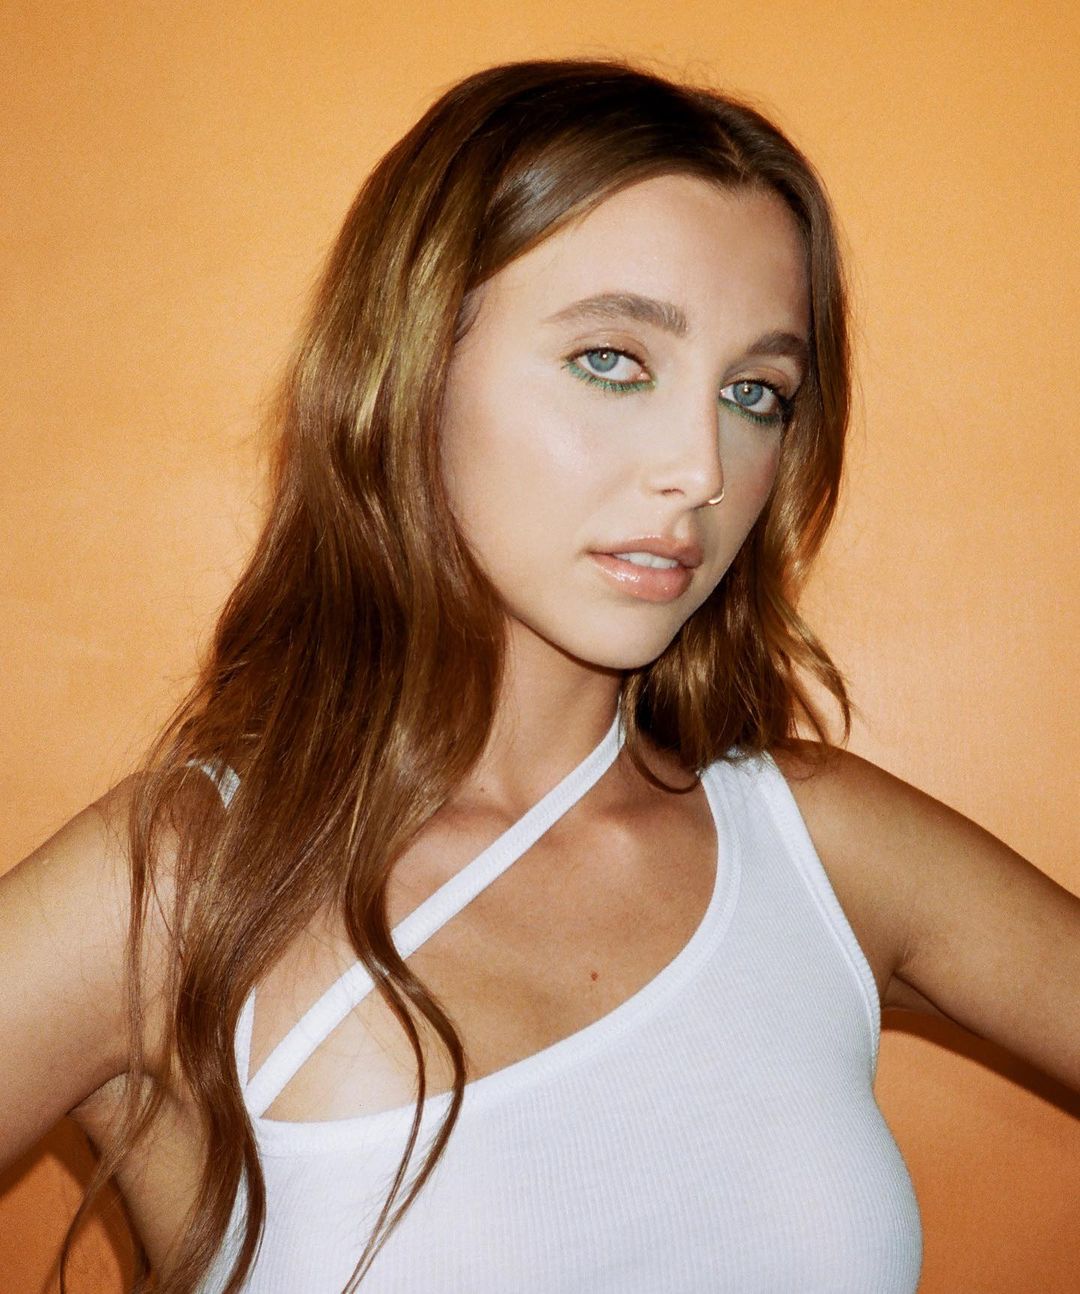 Emma Chamberlain is changing  for the better by keeping it real